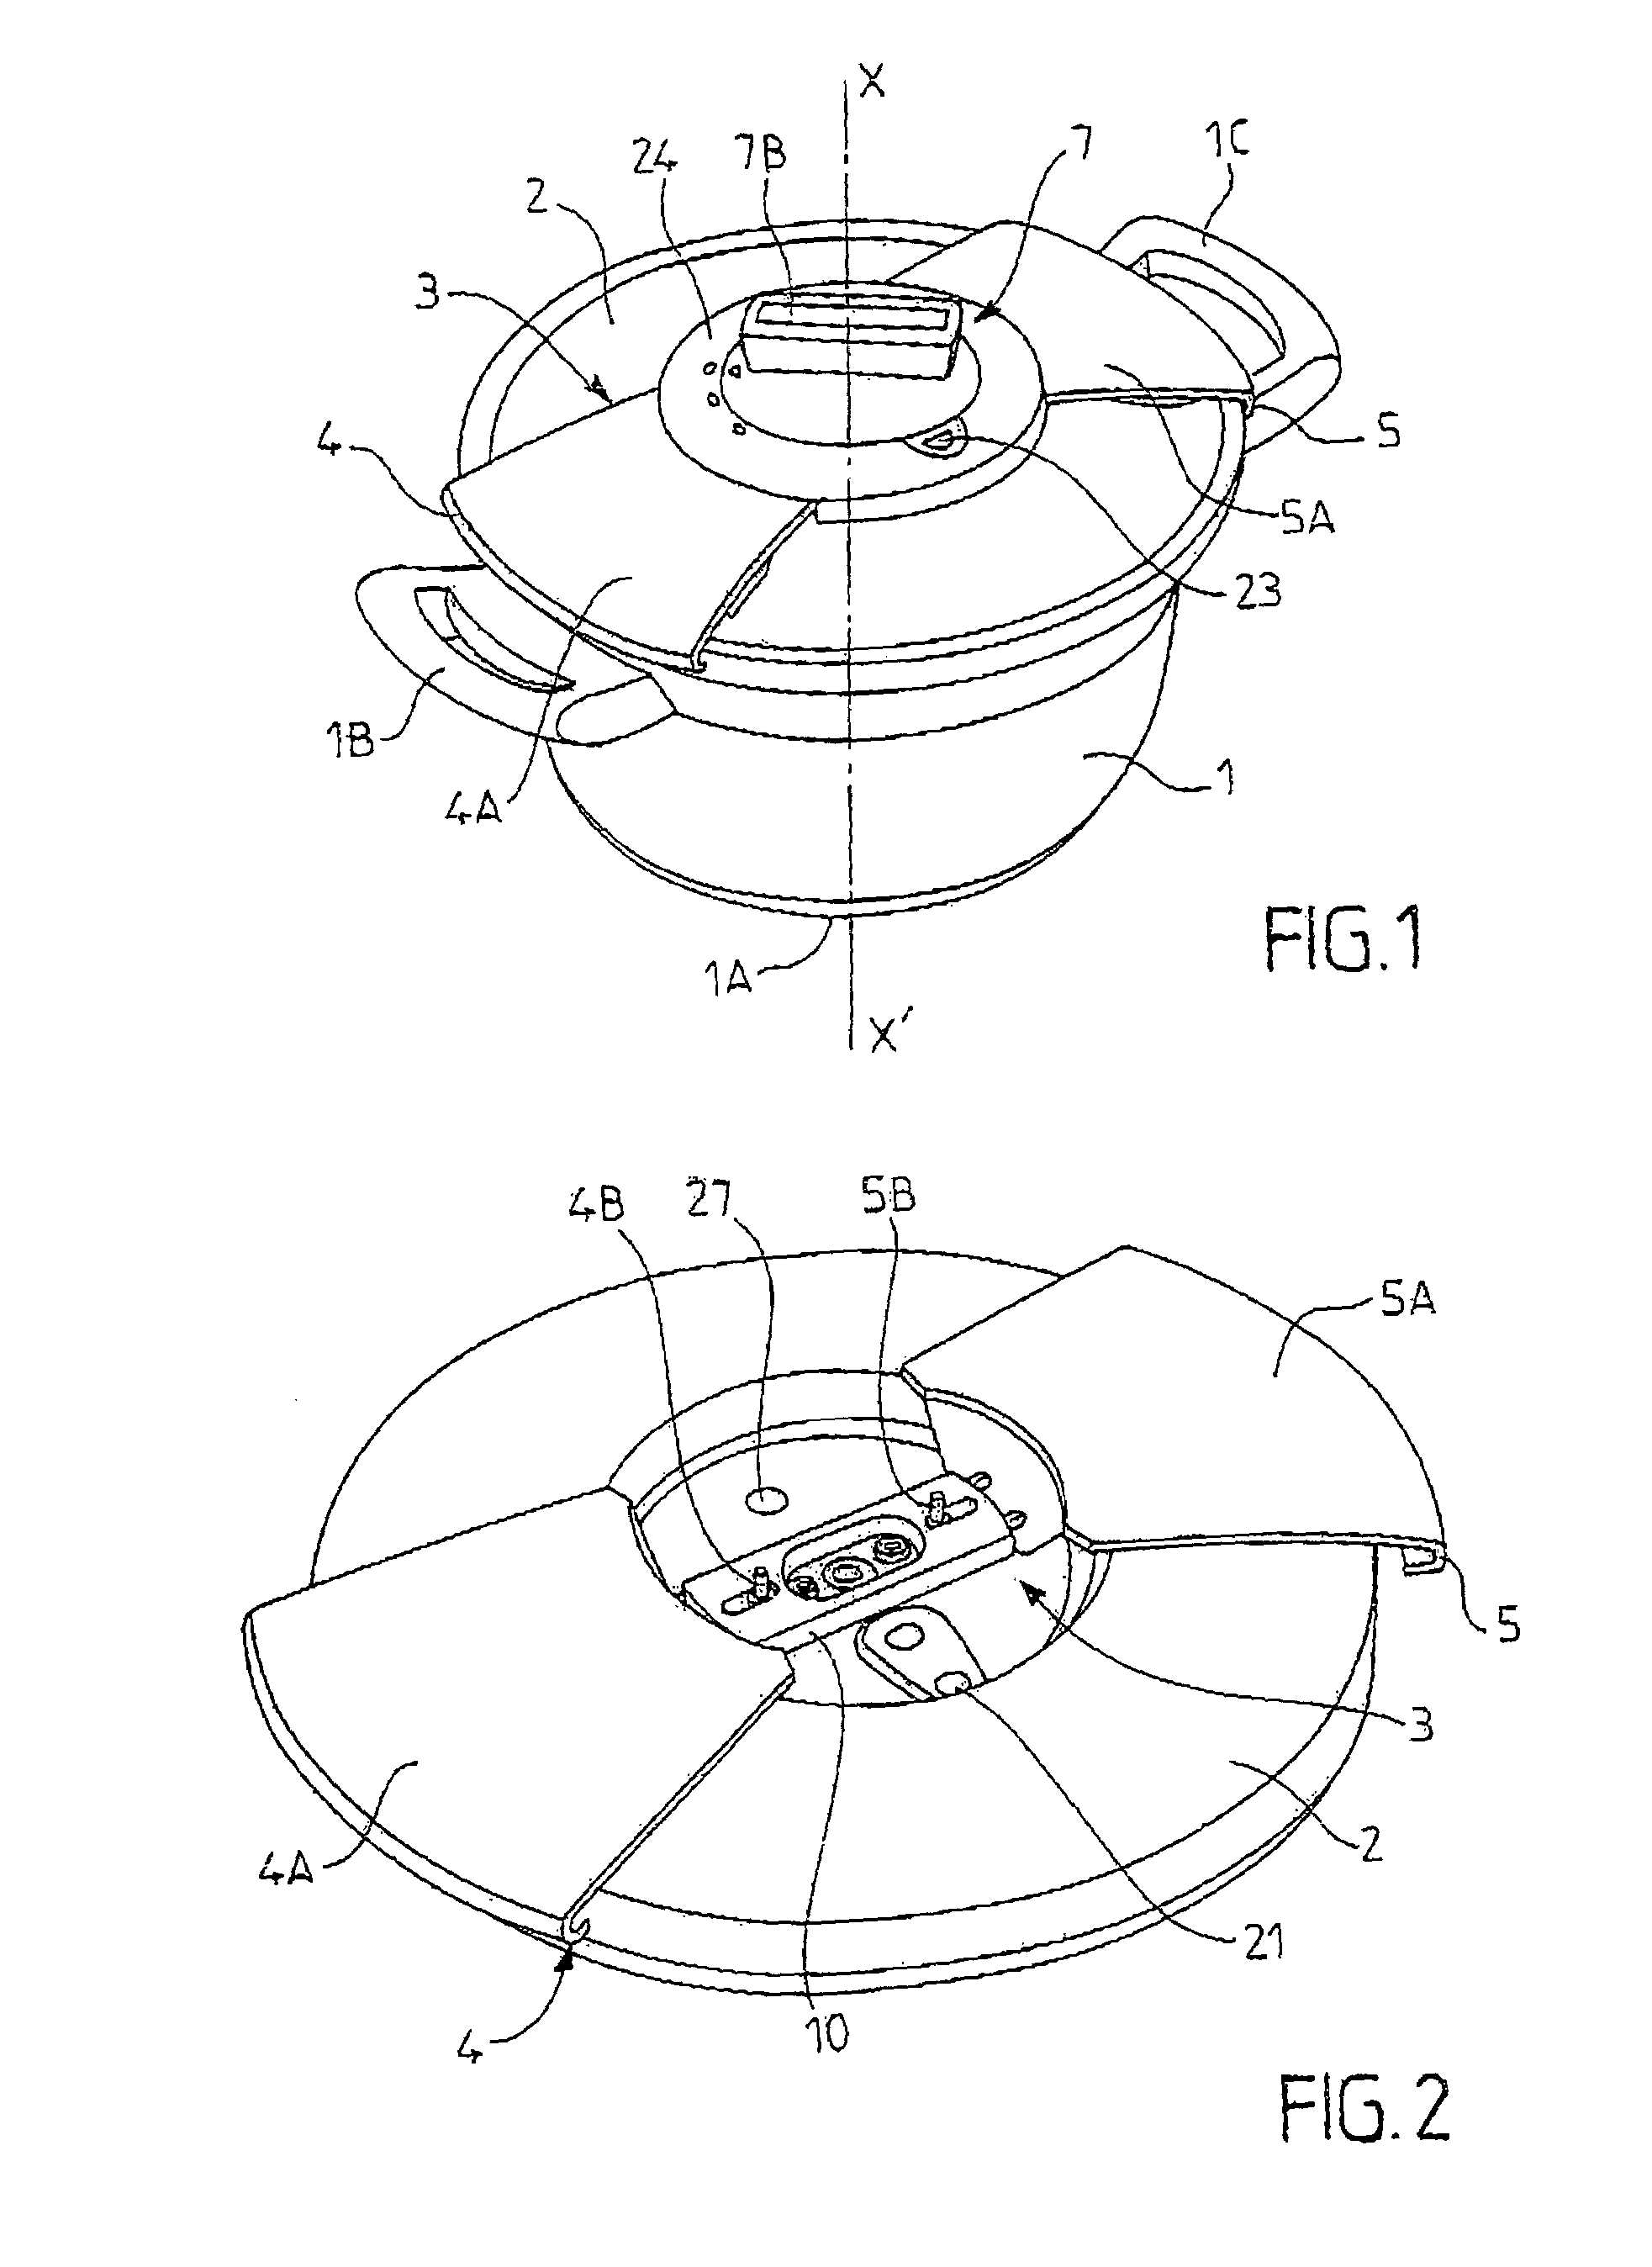 Pressure-cooking appliance having a single control member for decompression and for locking/unlocking